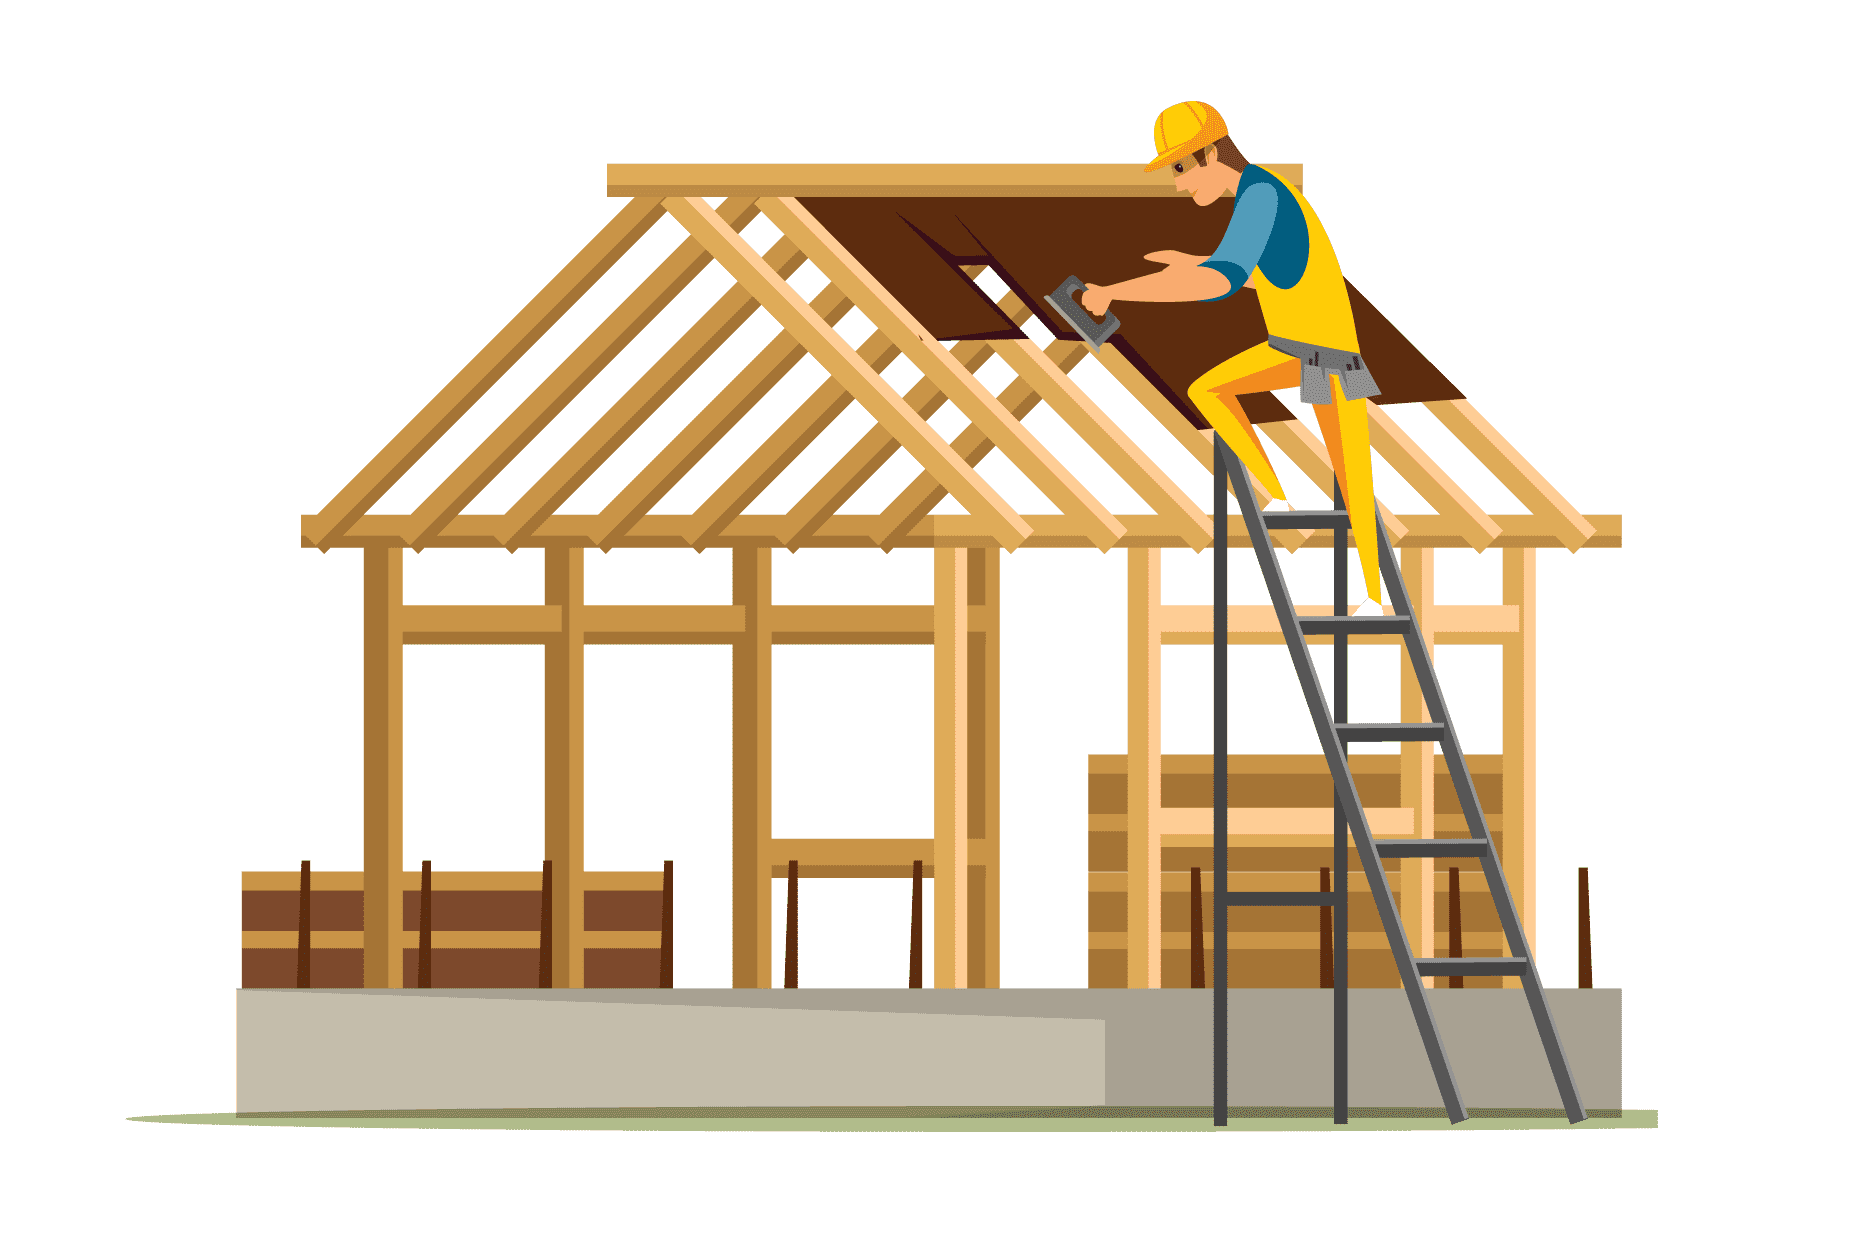 vector image of construction worker on ladder framing a house